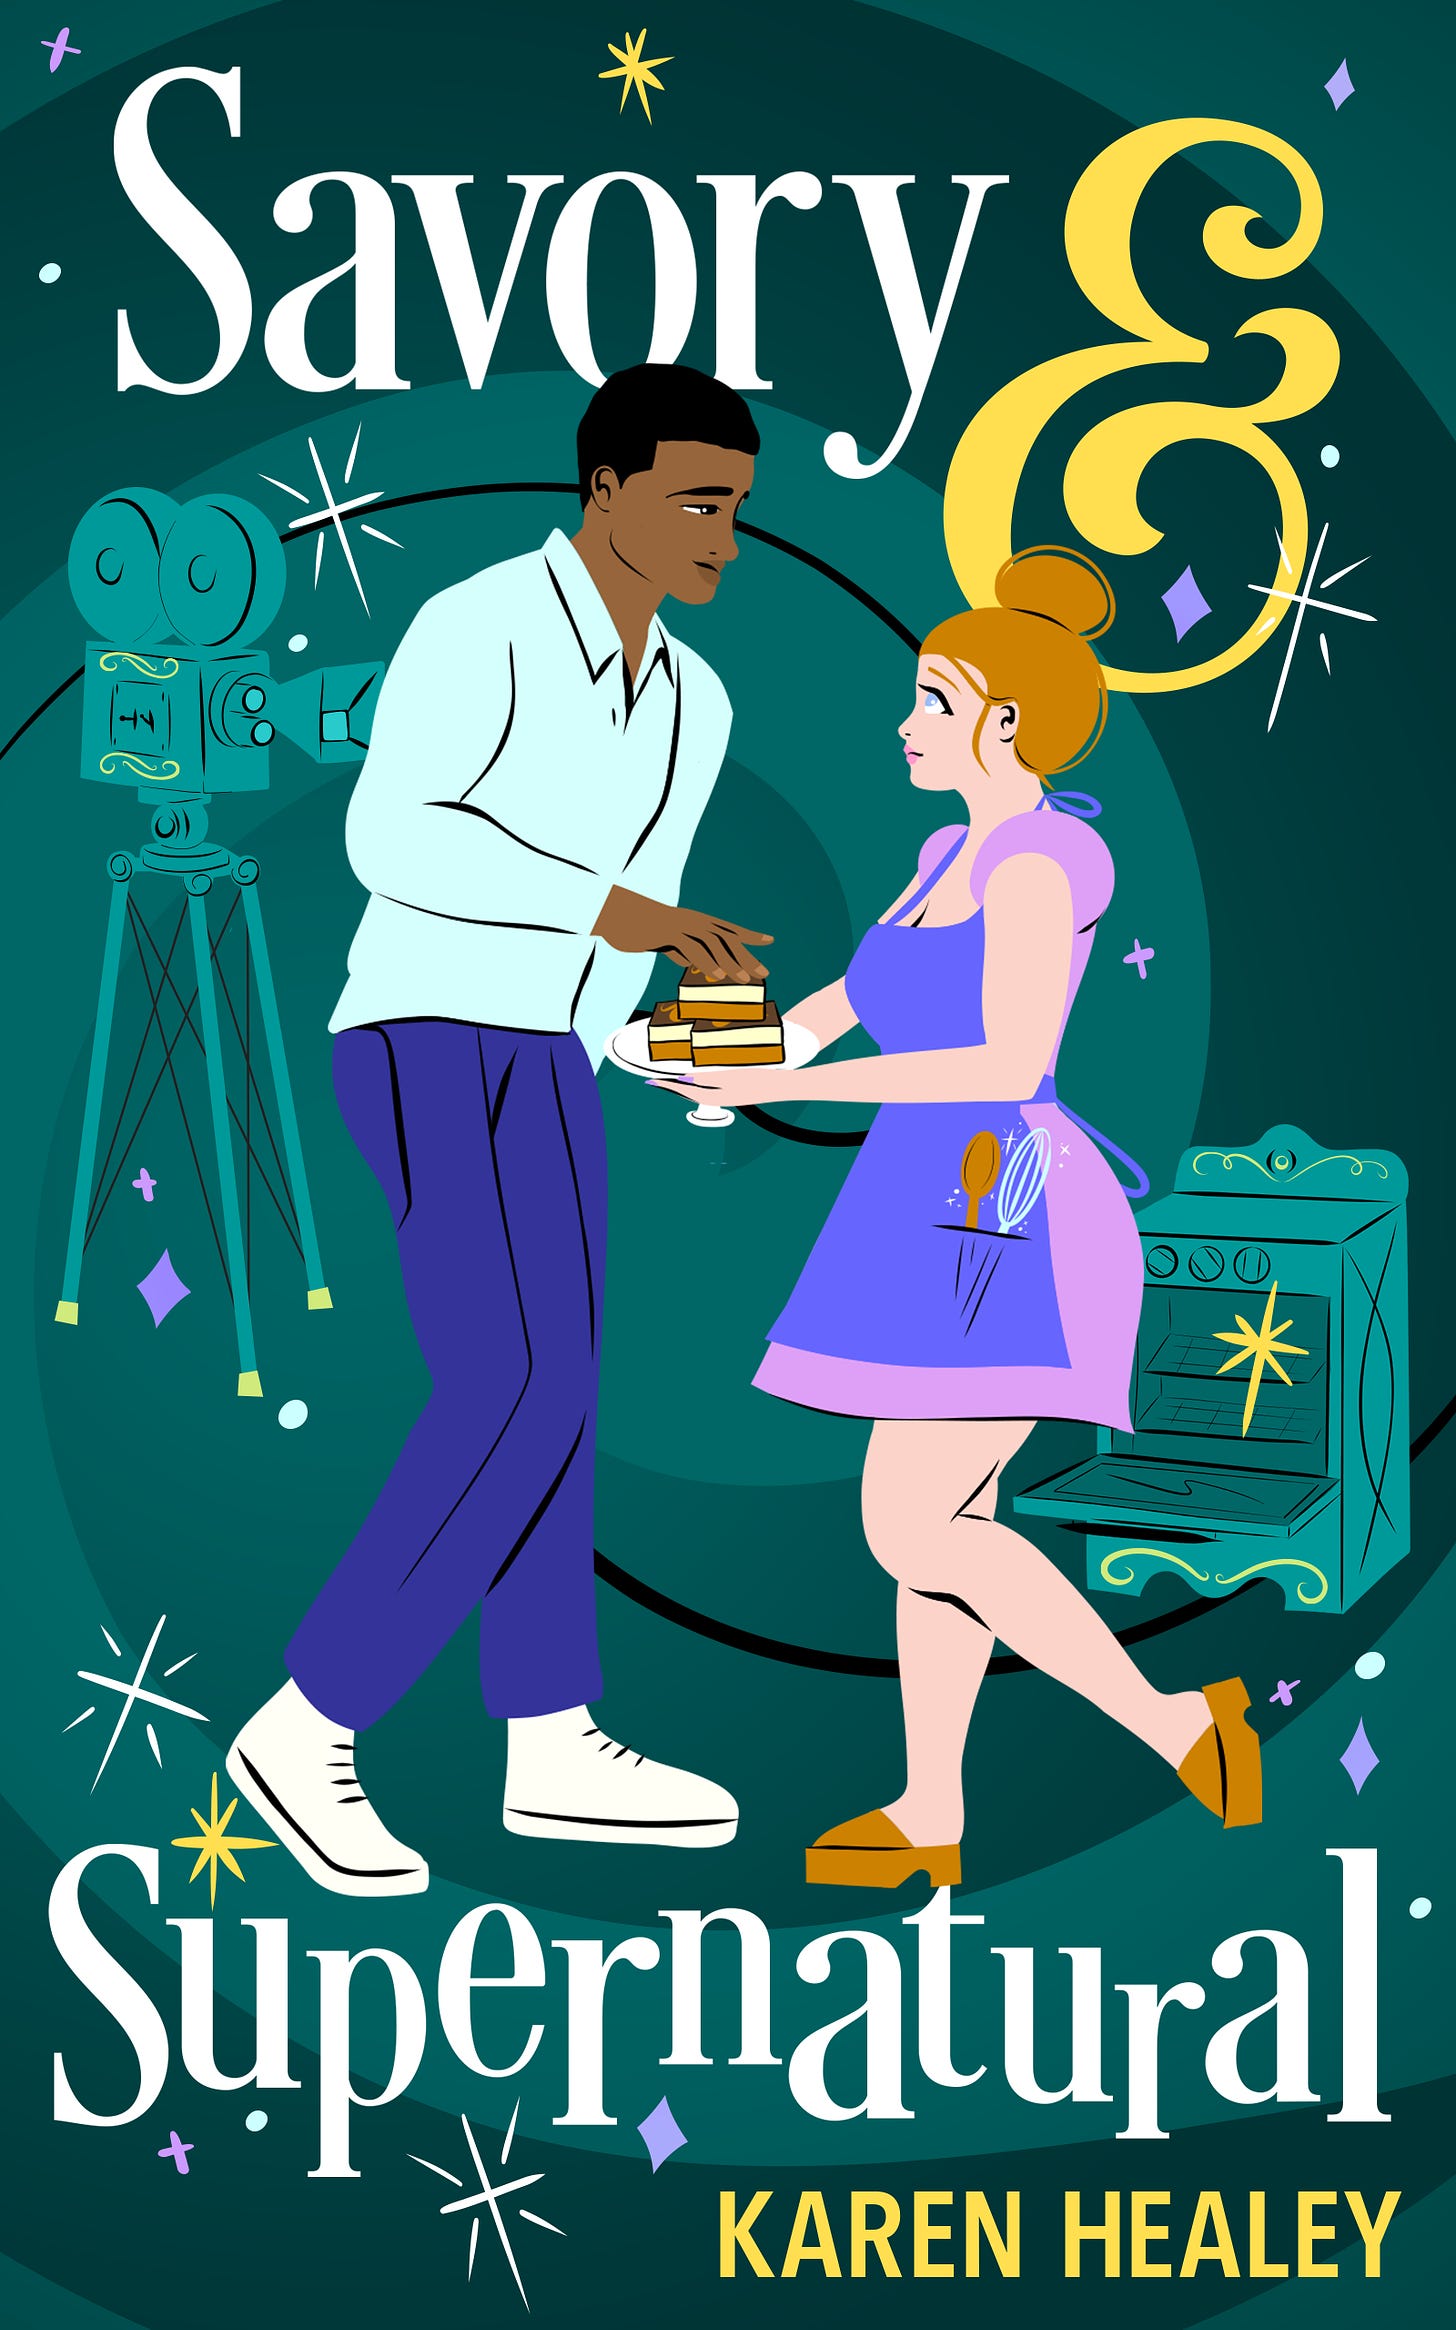 Green background with sketches of a film camera and an oven; white and yellow text reading Savory & Supernatural. Foreground shows two figures, a black man in blue plants and a light mint shirt leaning down to take a slice off a cake plate held by a white woman in a pink dress and blue apron. She has a whisk and a wooden spoon in her apron pocket. They are making cute eye contact and there are sparkles and swirls everywhere.